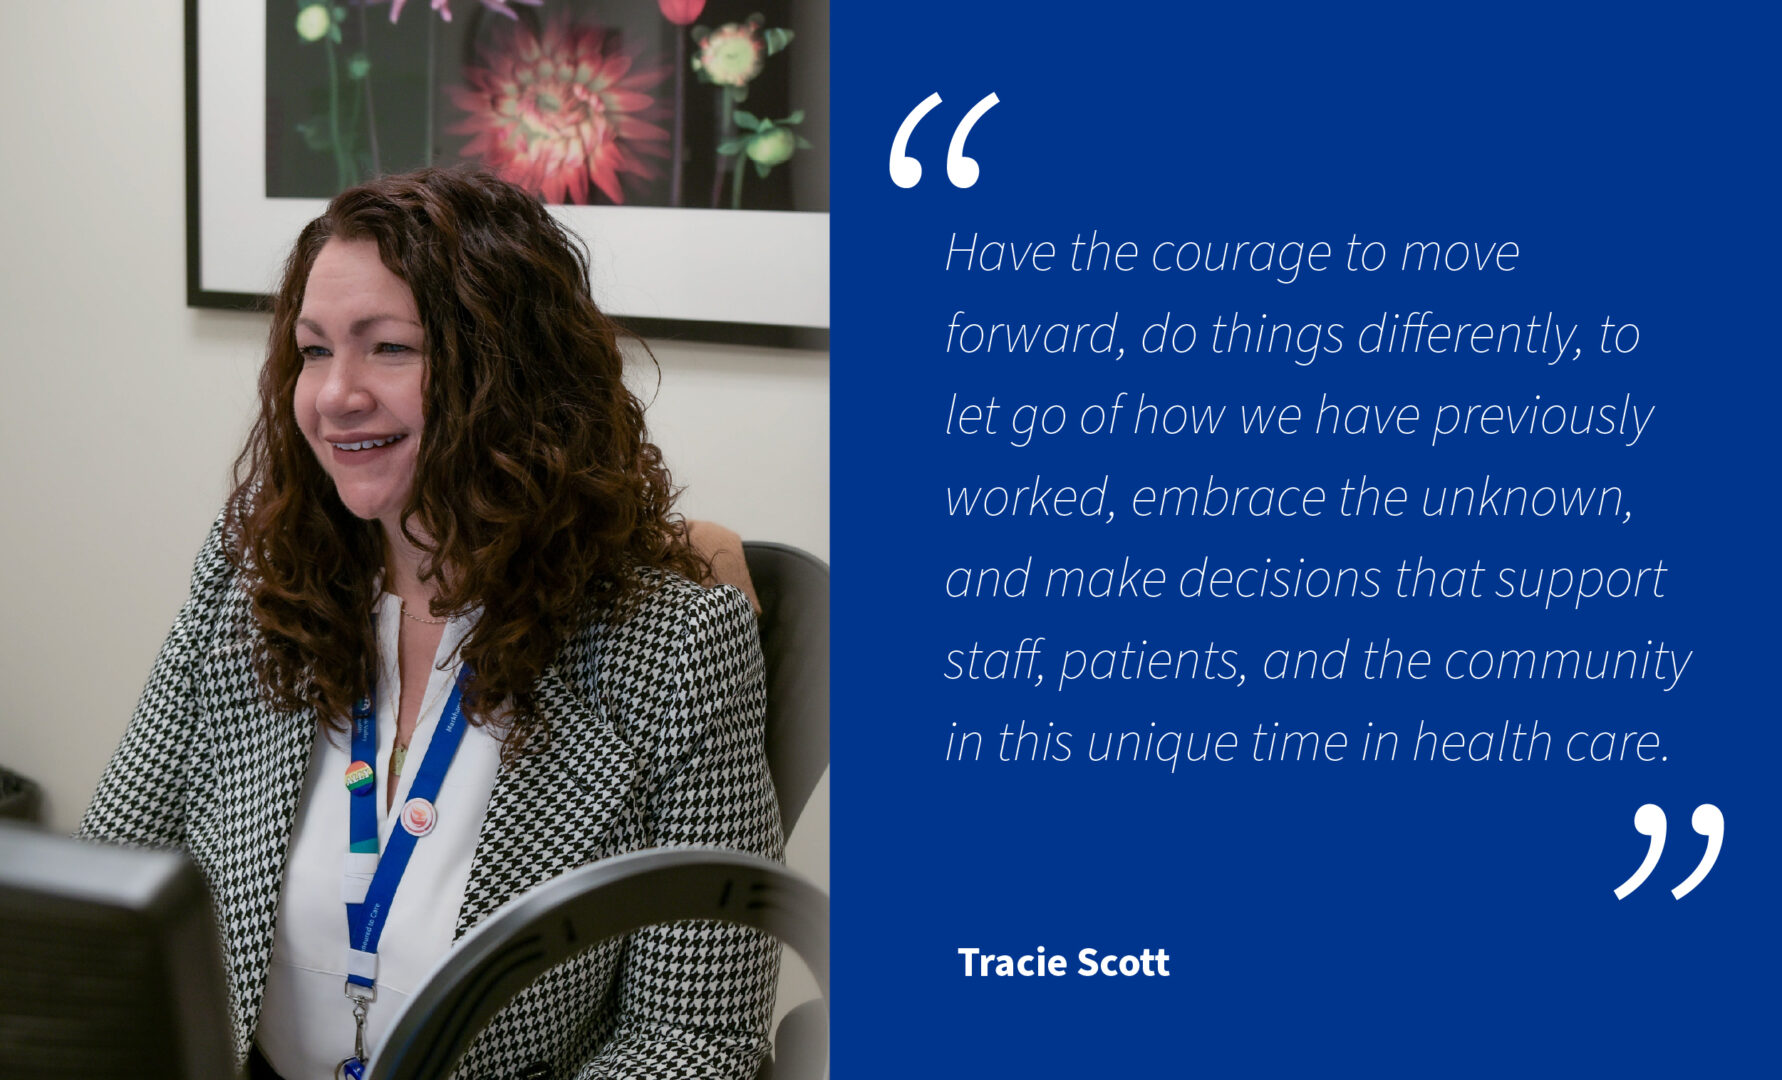 Photo of Tracie, the director of Interprofessional Practice and Education at Oak Valley Health working in her office with her quote on the right side in a blue box that says, "Have the courage to move forward, do things differently, to let go of how we have previously worked, embrace the unknown, and make decisions that support staff, patients and the community in this unique time in health care.".